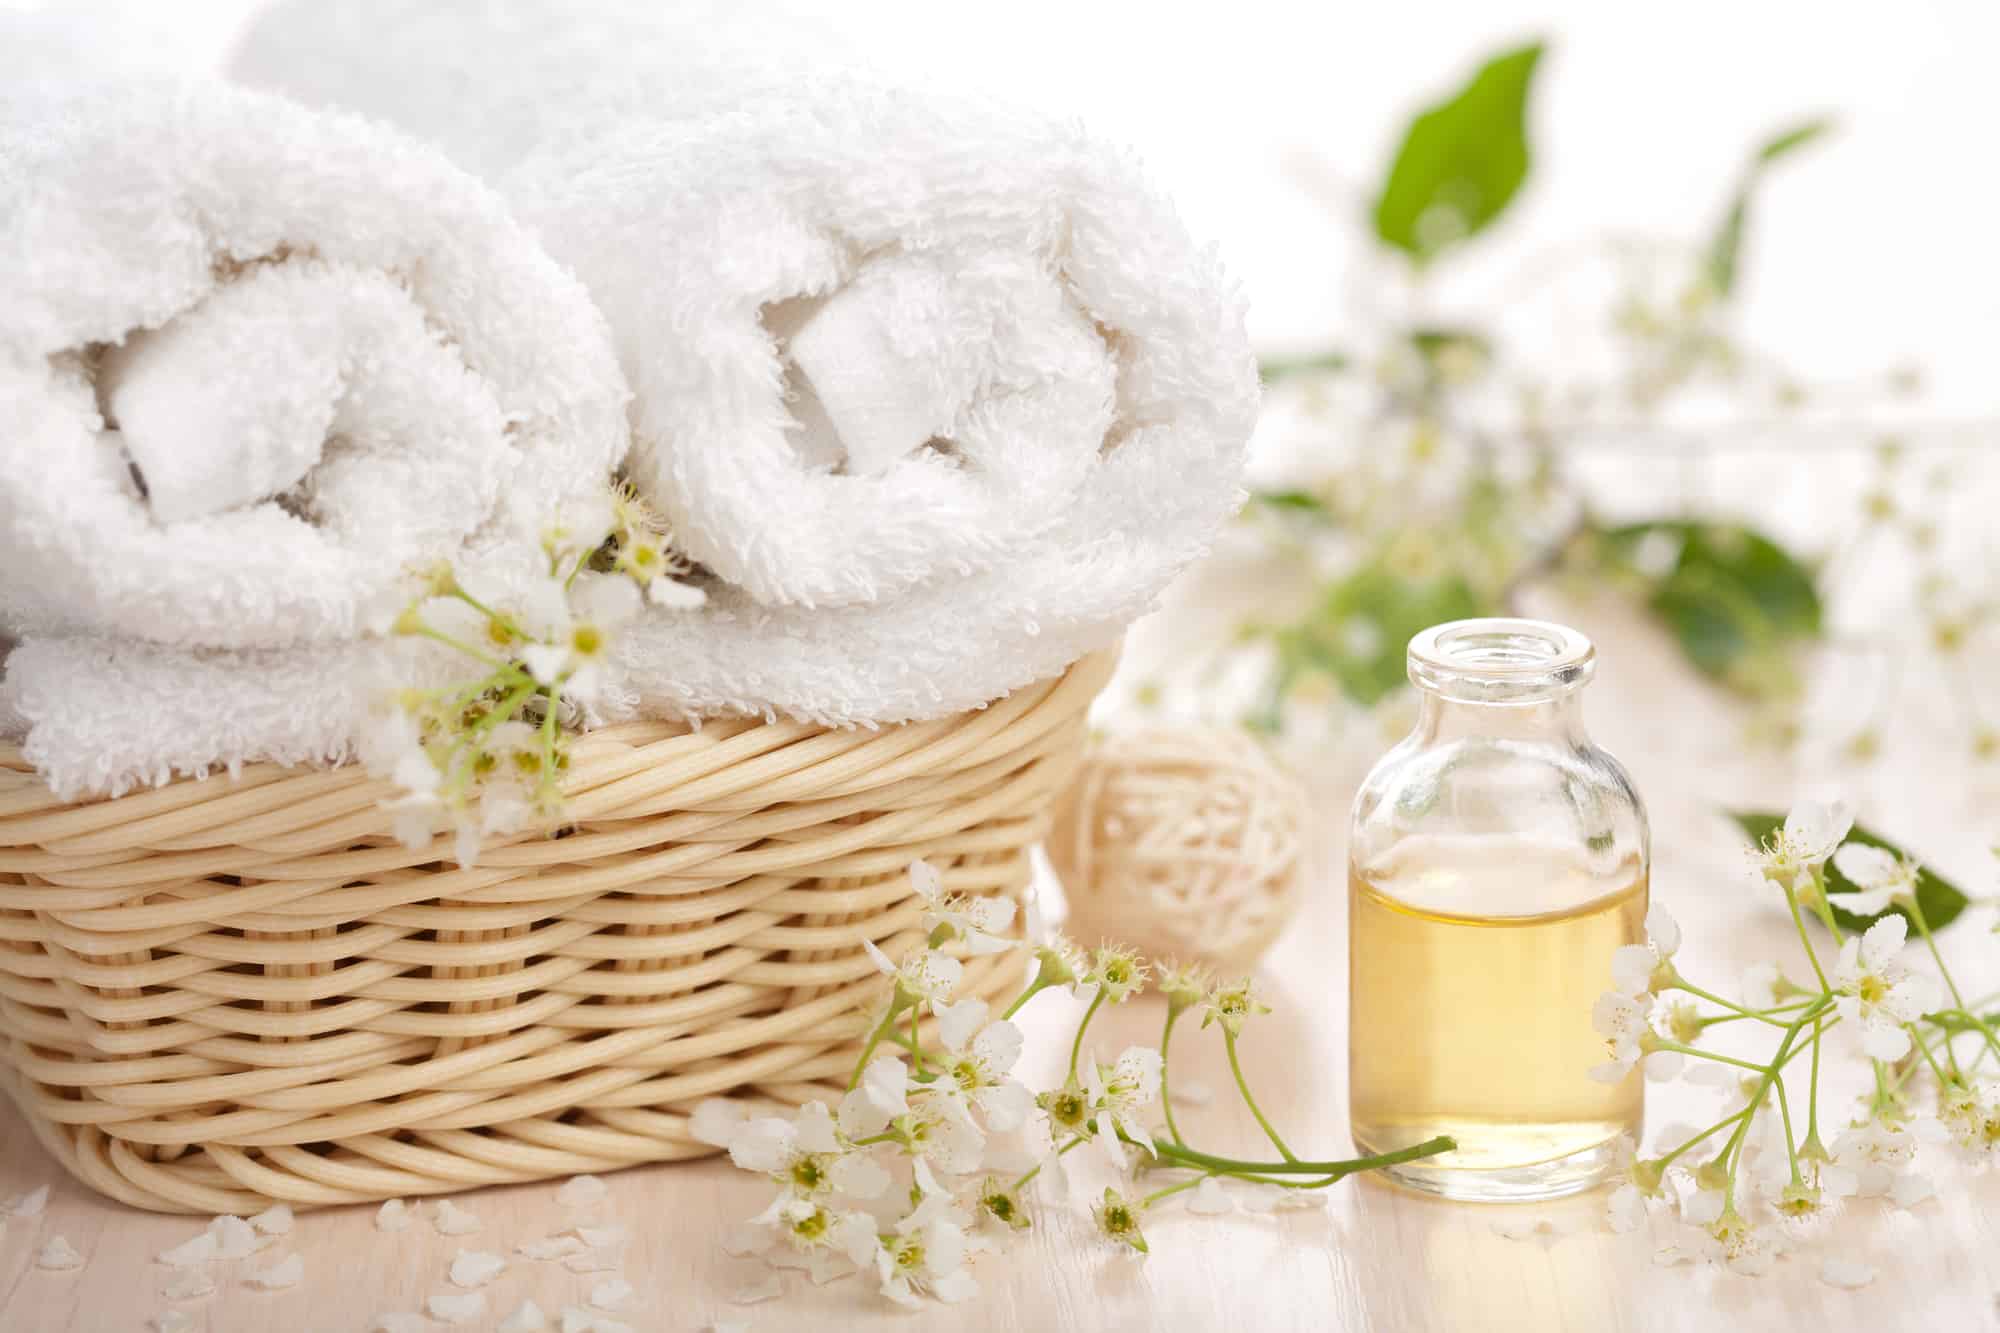 essential oils and towels for the shower